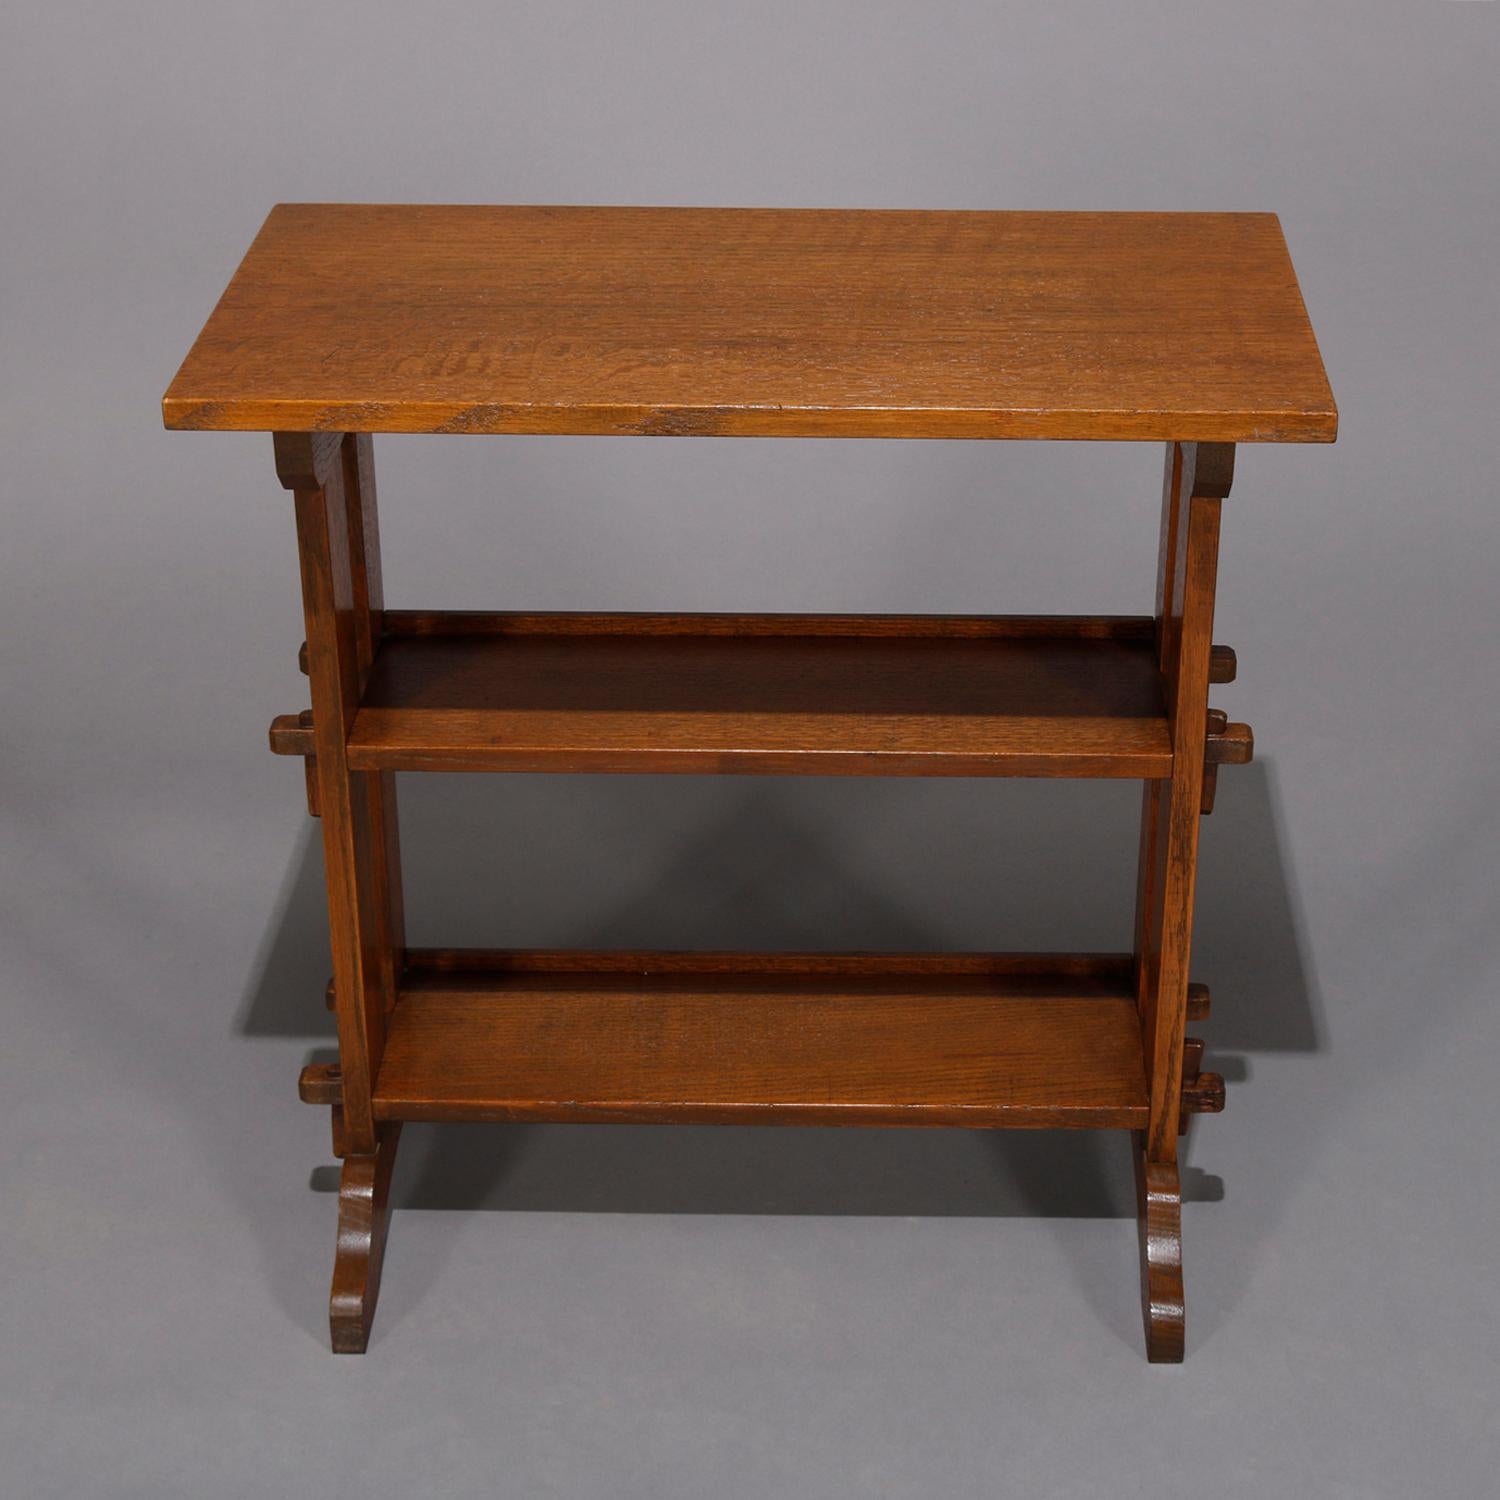 An antique Arts & Crafts mission oak little journey bookstand by Roycroft offers quarter sawn oak construction with upper counter over two mortise and tenon shelves, maker label as photographed, circa 1900.

***DELIVERY NOTICE – Due to COVID-19 we